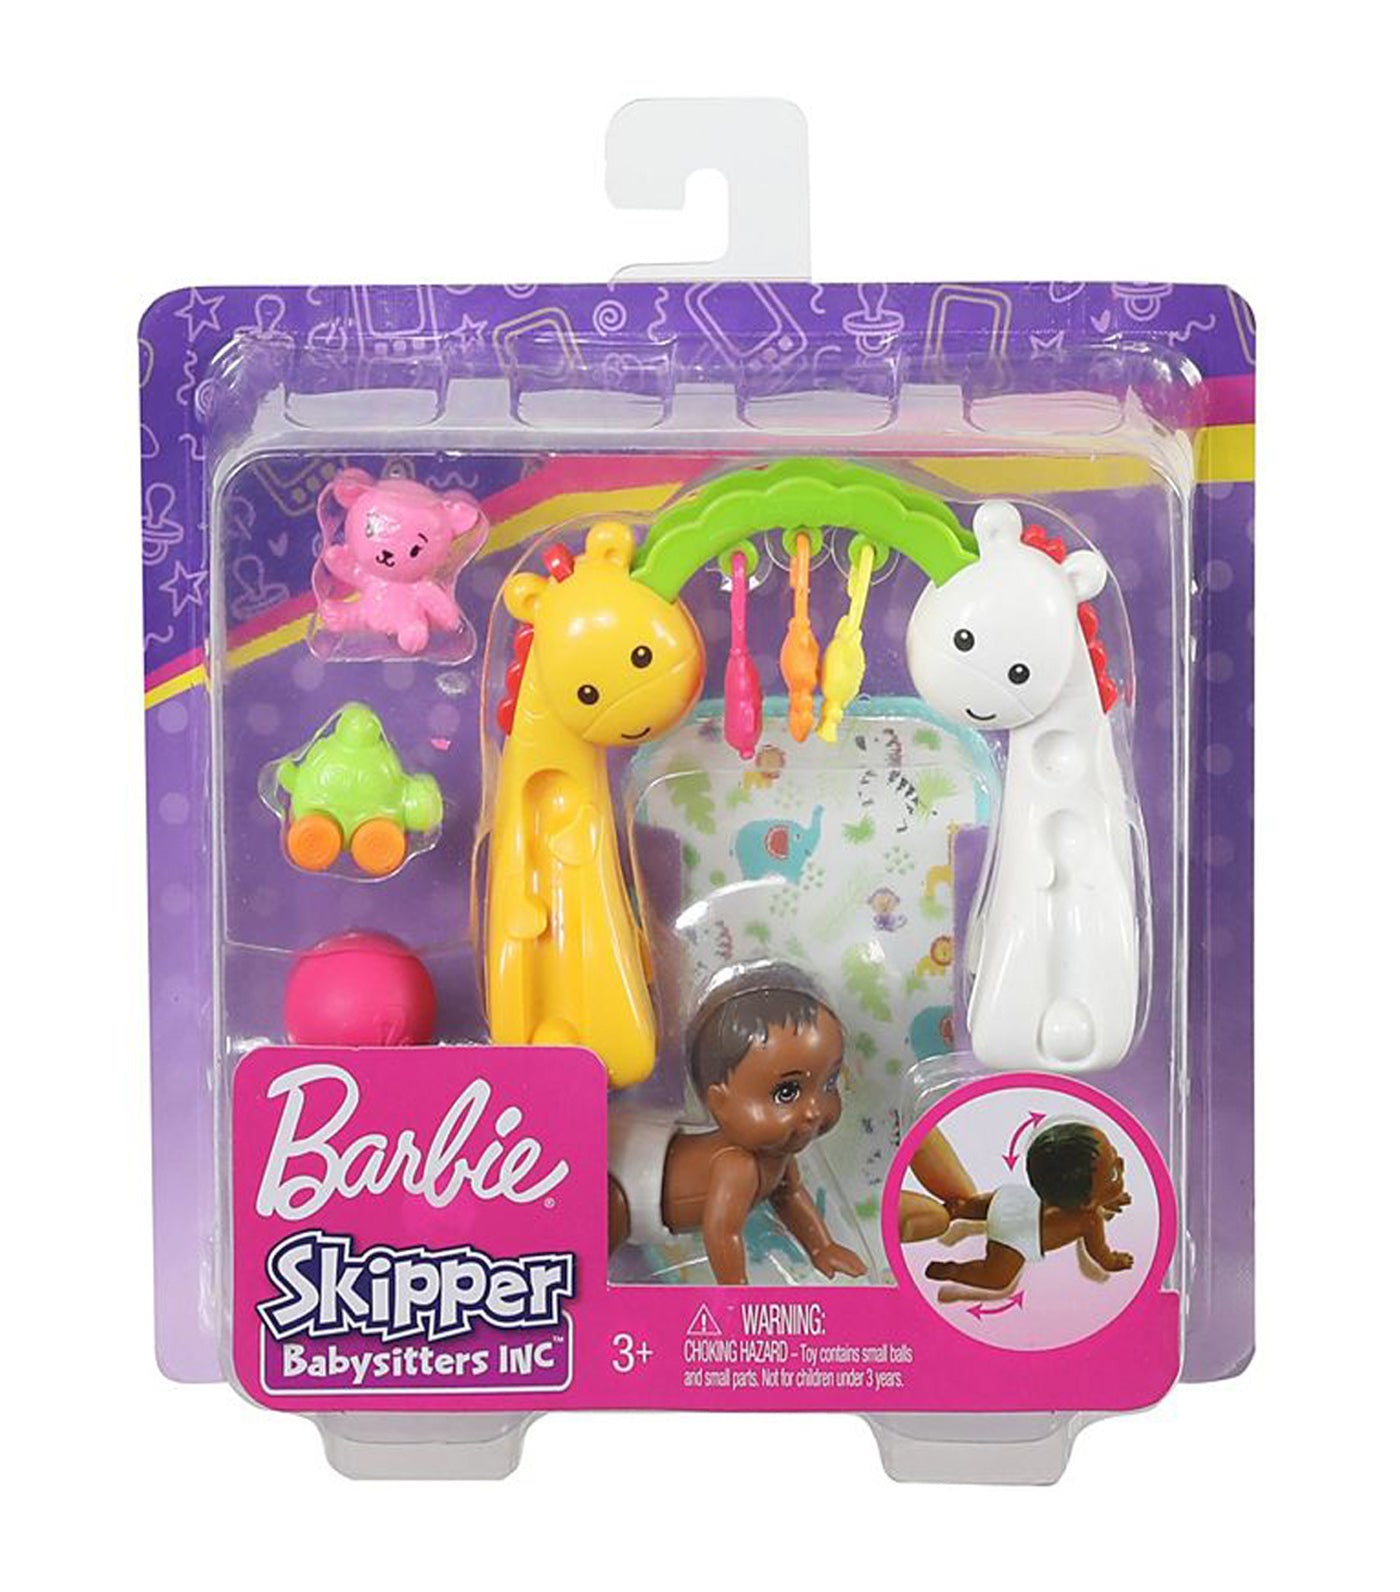 barbie® skipper™ babysitters inc. crawling and playtime playset